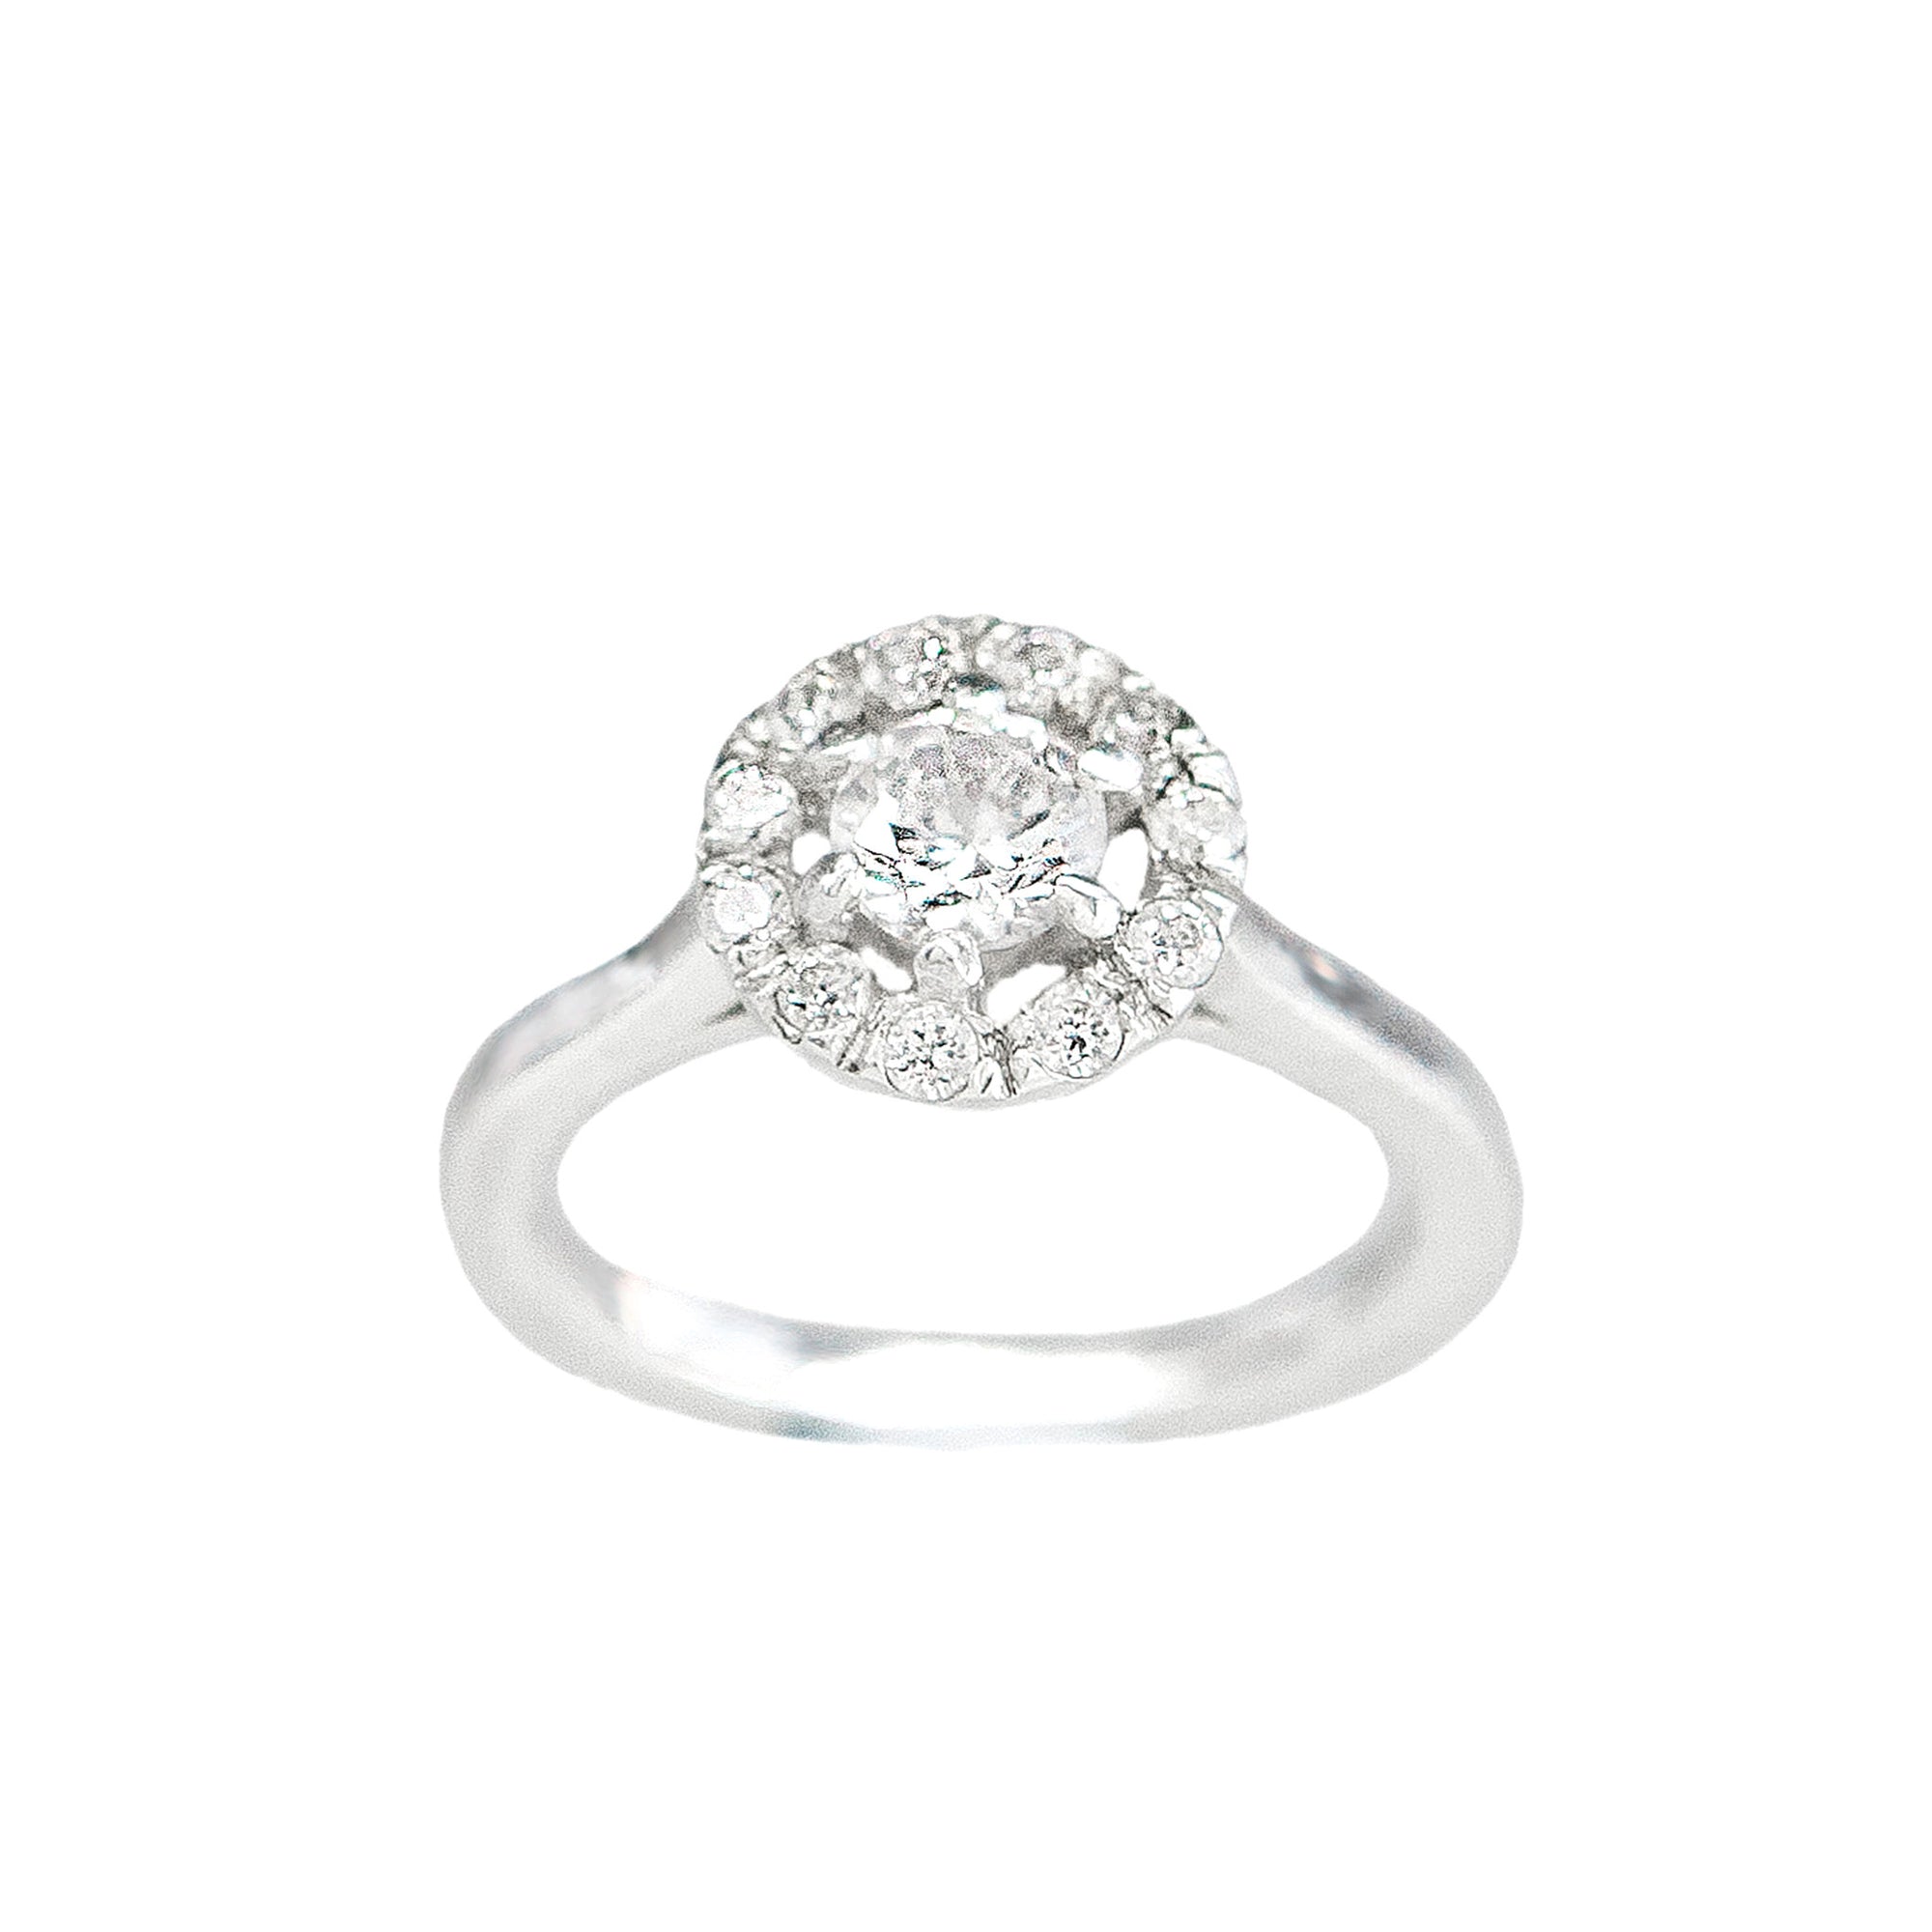 Colette Ethical Halo Engagement Ring